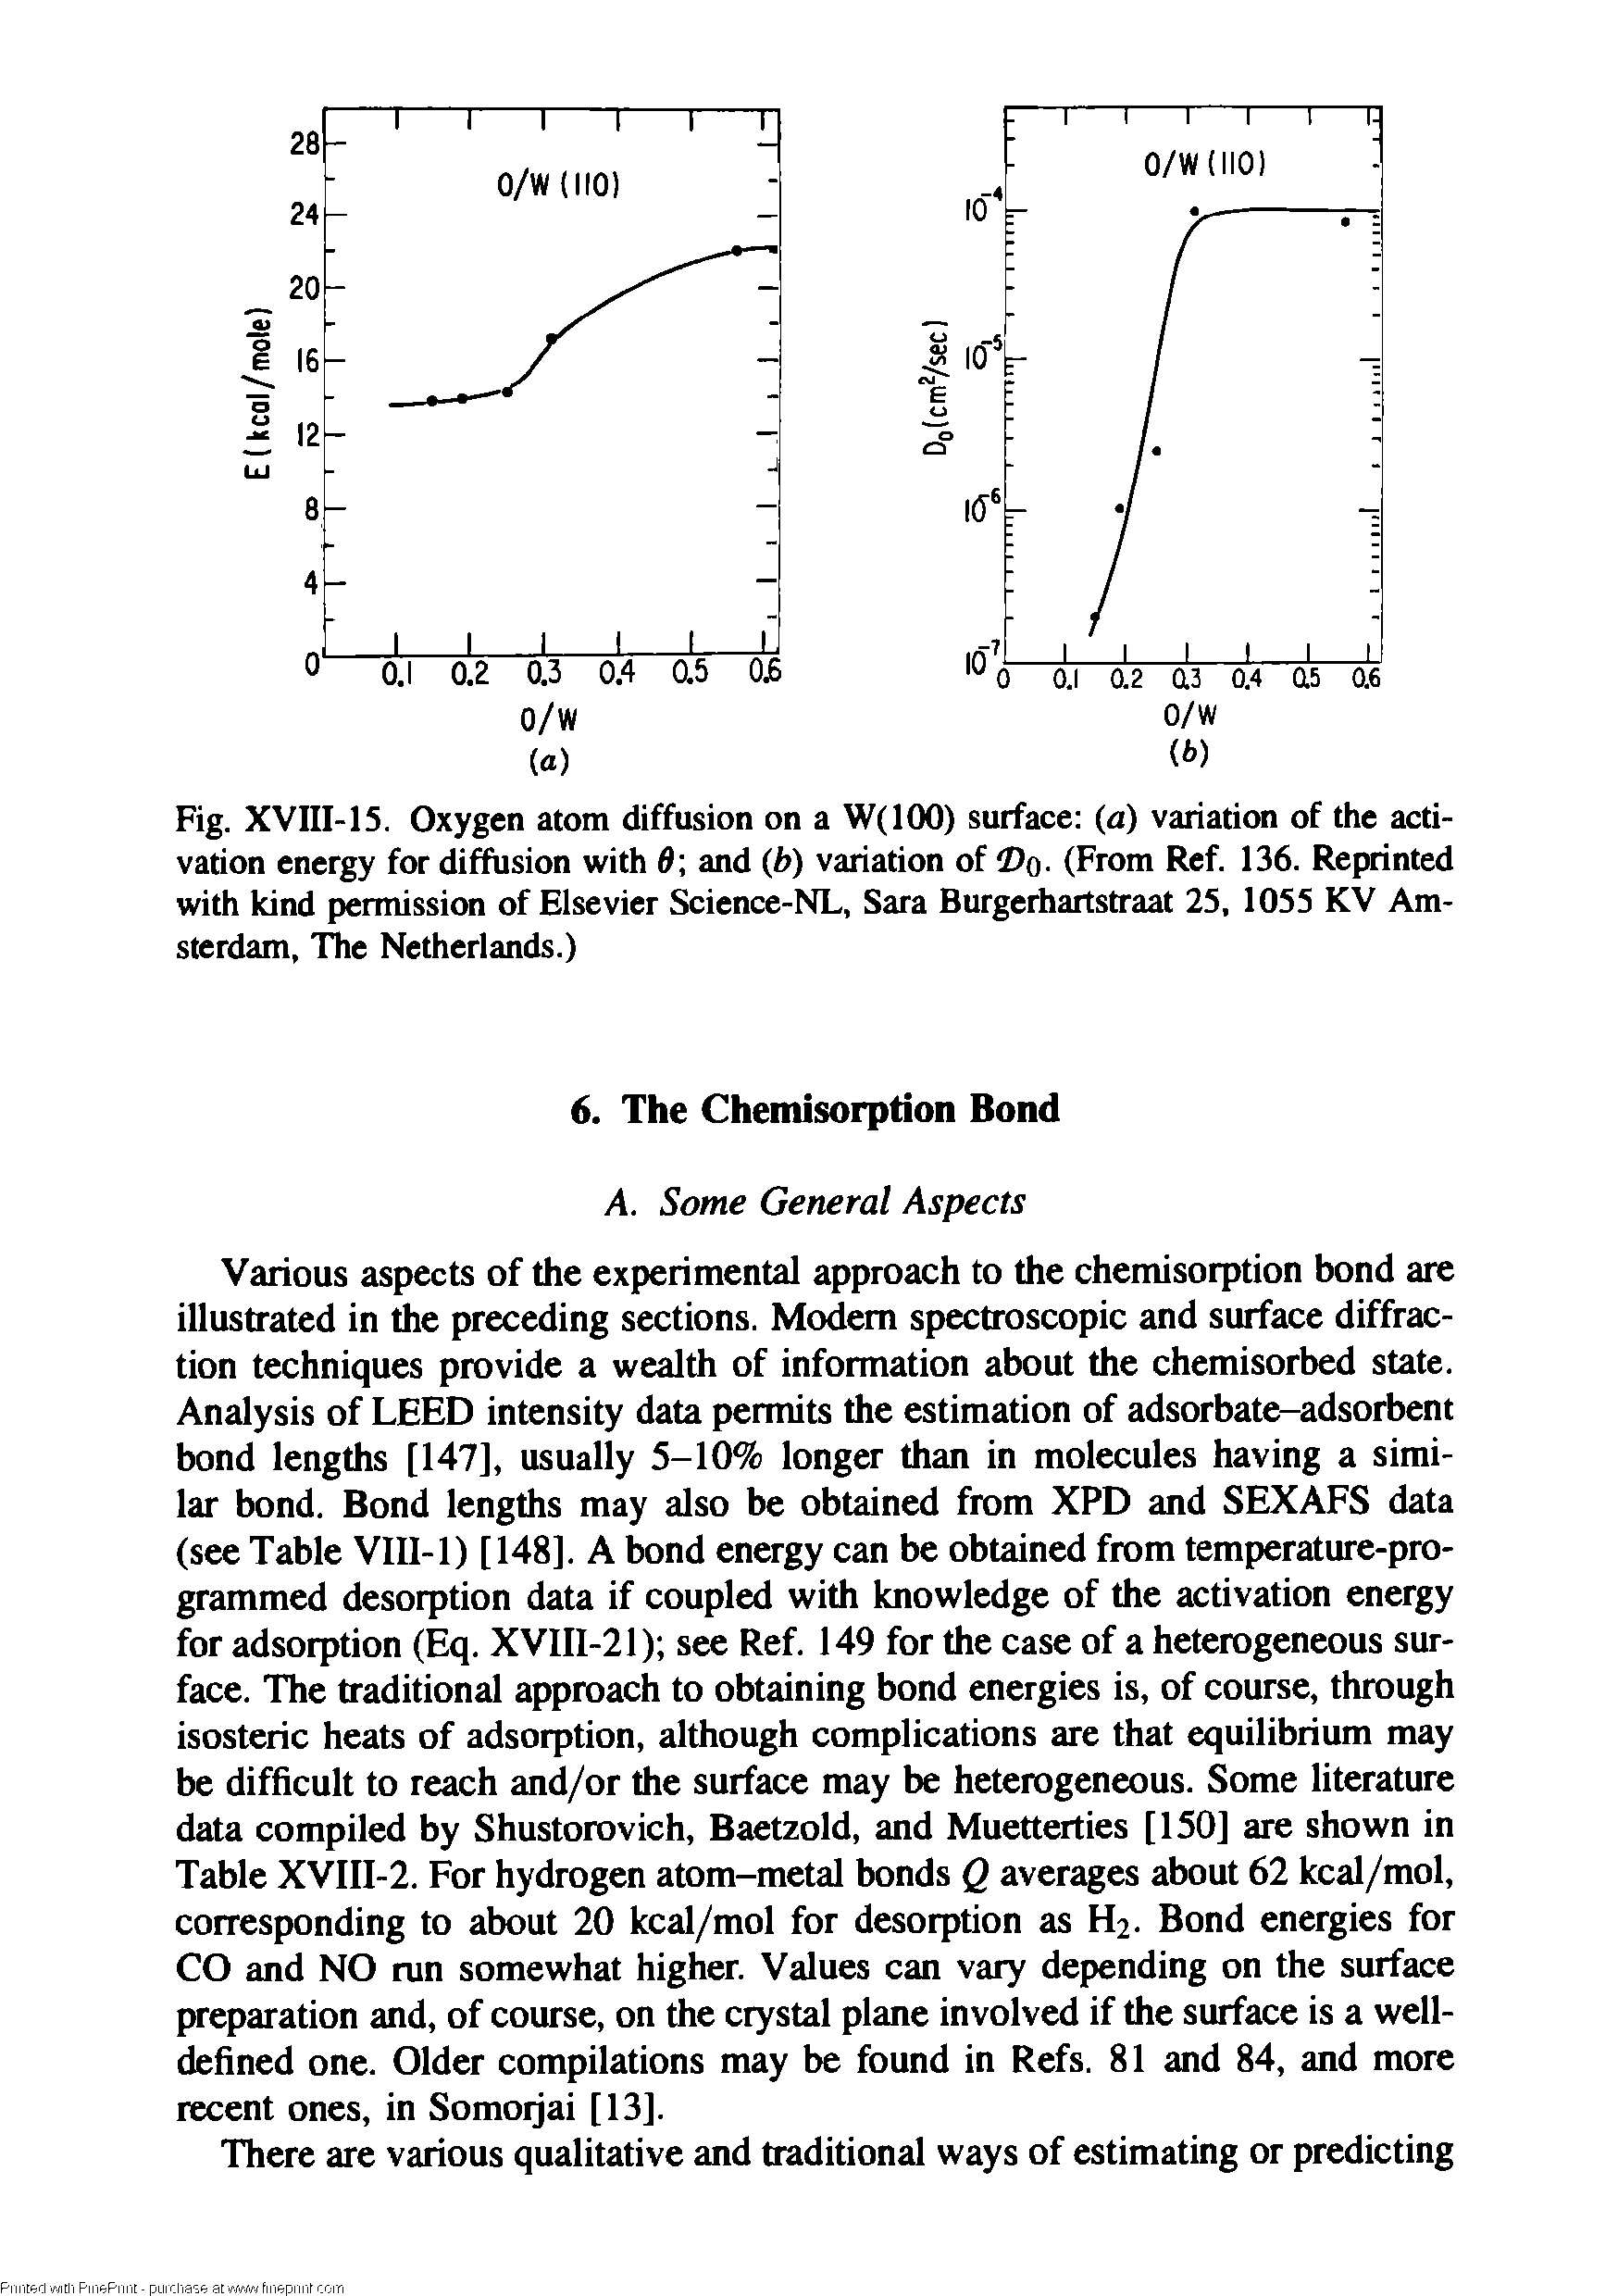 Fig. XVIII-15. Oxygen atom diffusion on a W(IOO) surface (a) variation of the activation energy for diffusion with d and (b) variation of o- (From Ref. 136. Reprinted with kind permission of Elsevier Science-NL, Sara Burgerhartstraat 25, 1055 KV Amsterdam, The Netherlands.)...